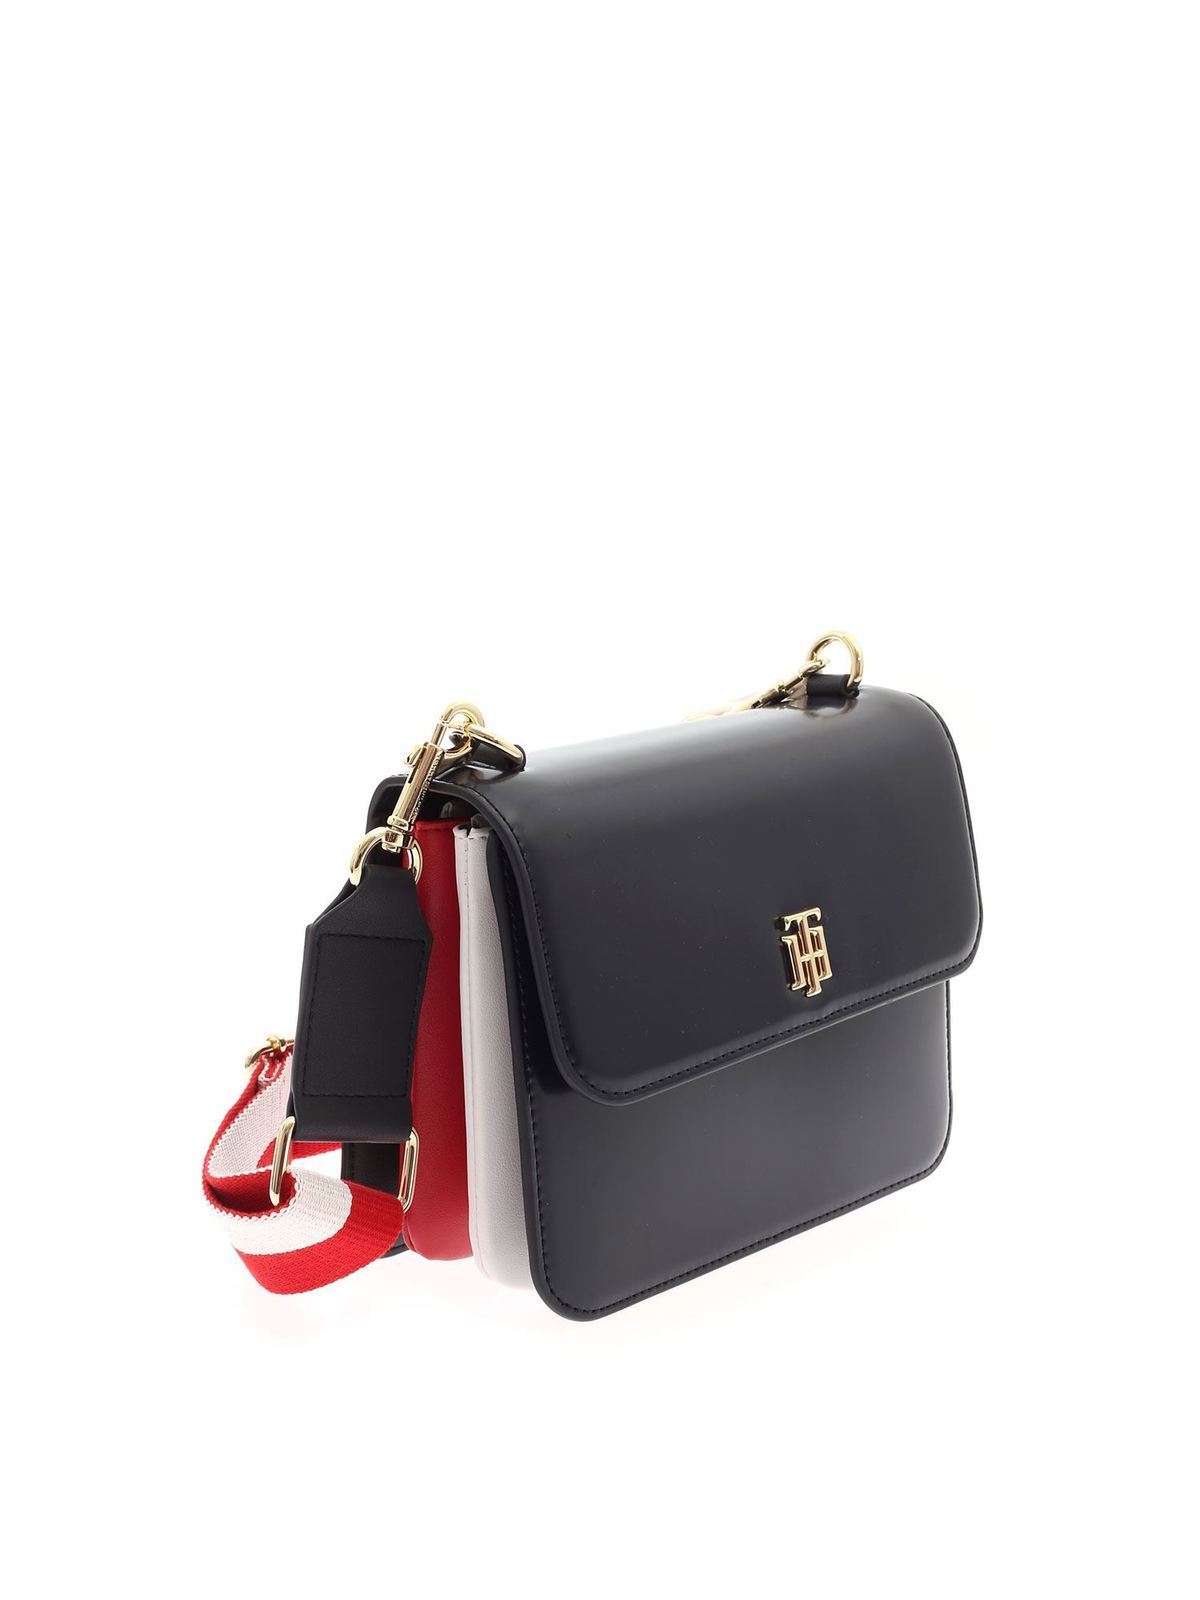 body bags Tommy Hilfiger - crossbody bag in blue red white - AW0AW09695DW5